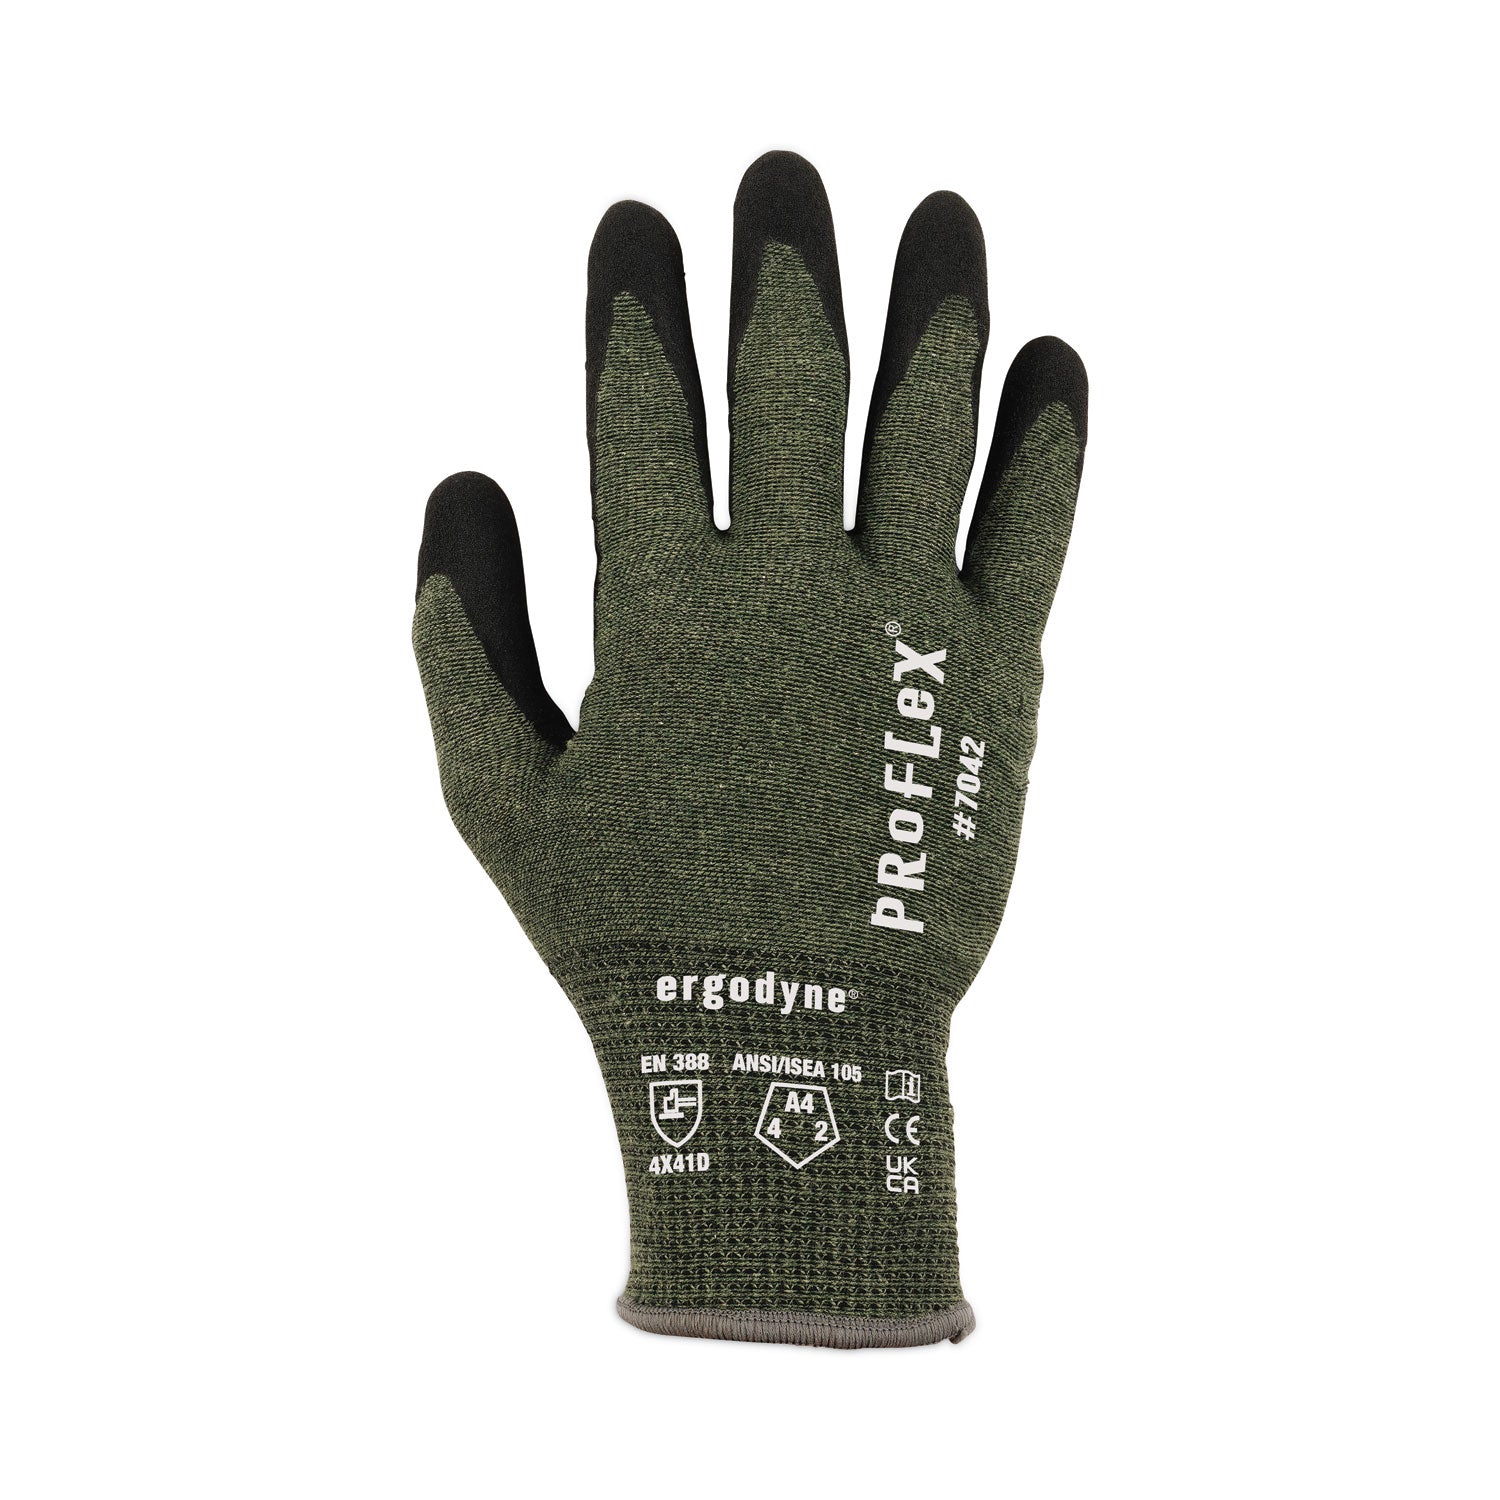 proflex-7042-ansi-a4-nitrile-coated-cr-gloves-green-medium-12-pairs-pack-ships-in-1-3-business-days_ego10333 - 4